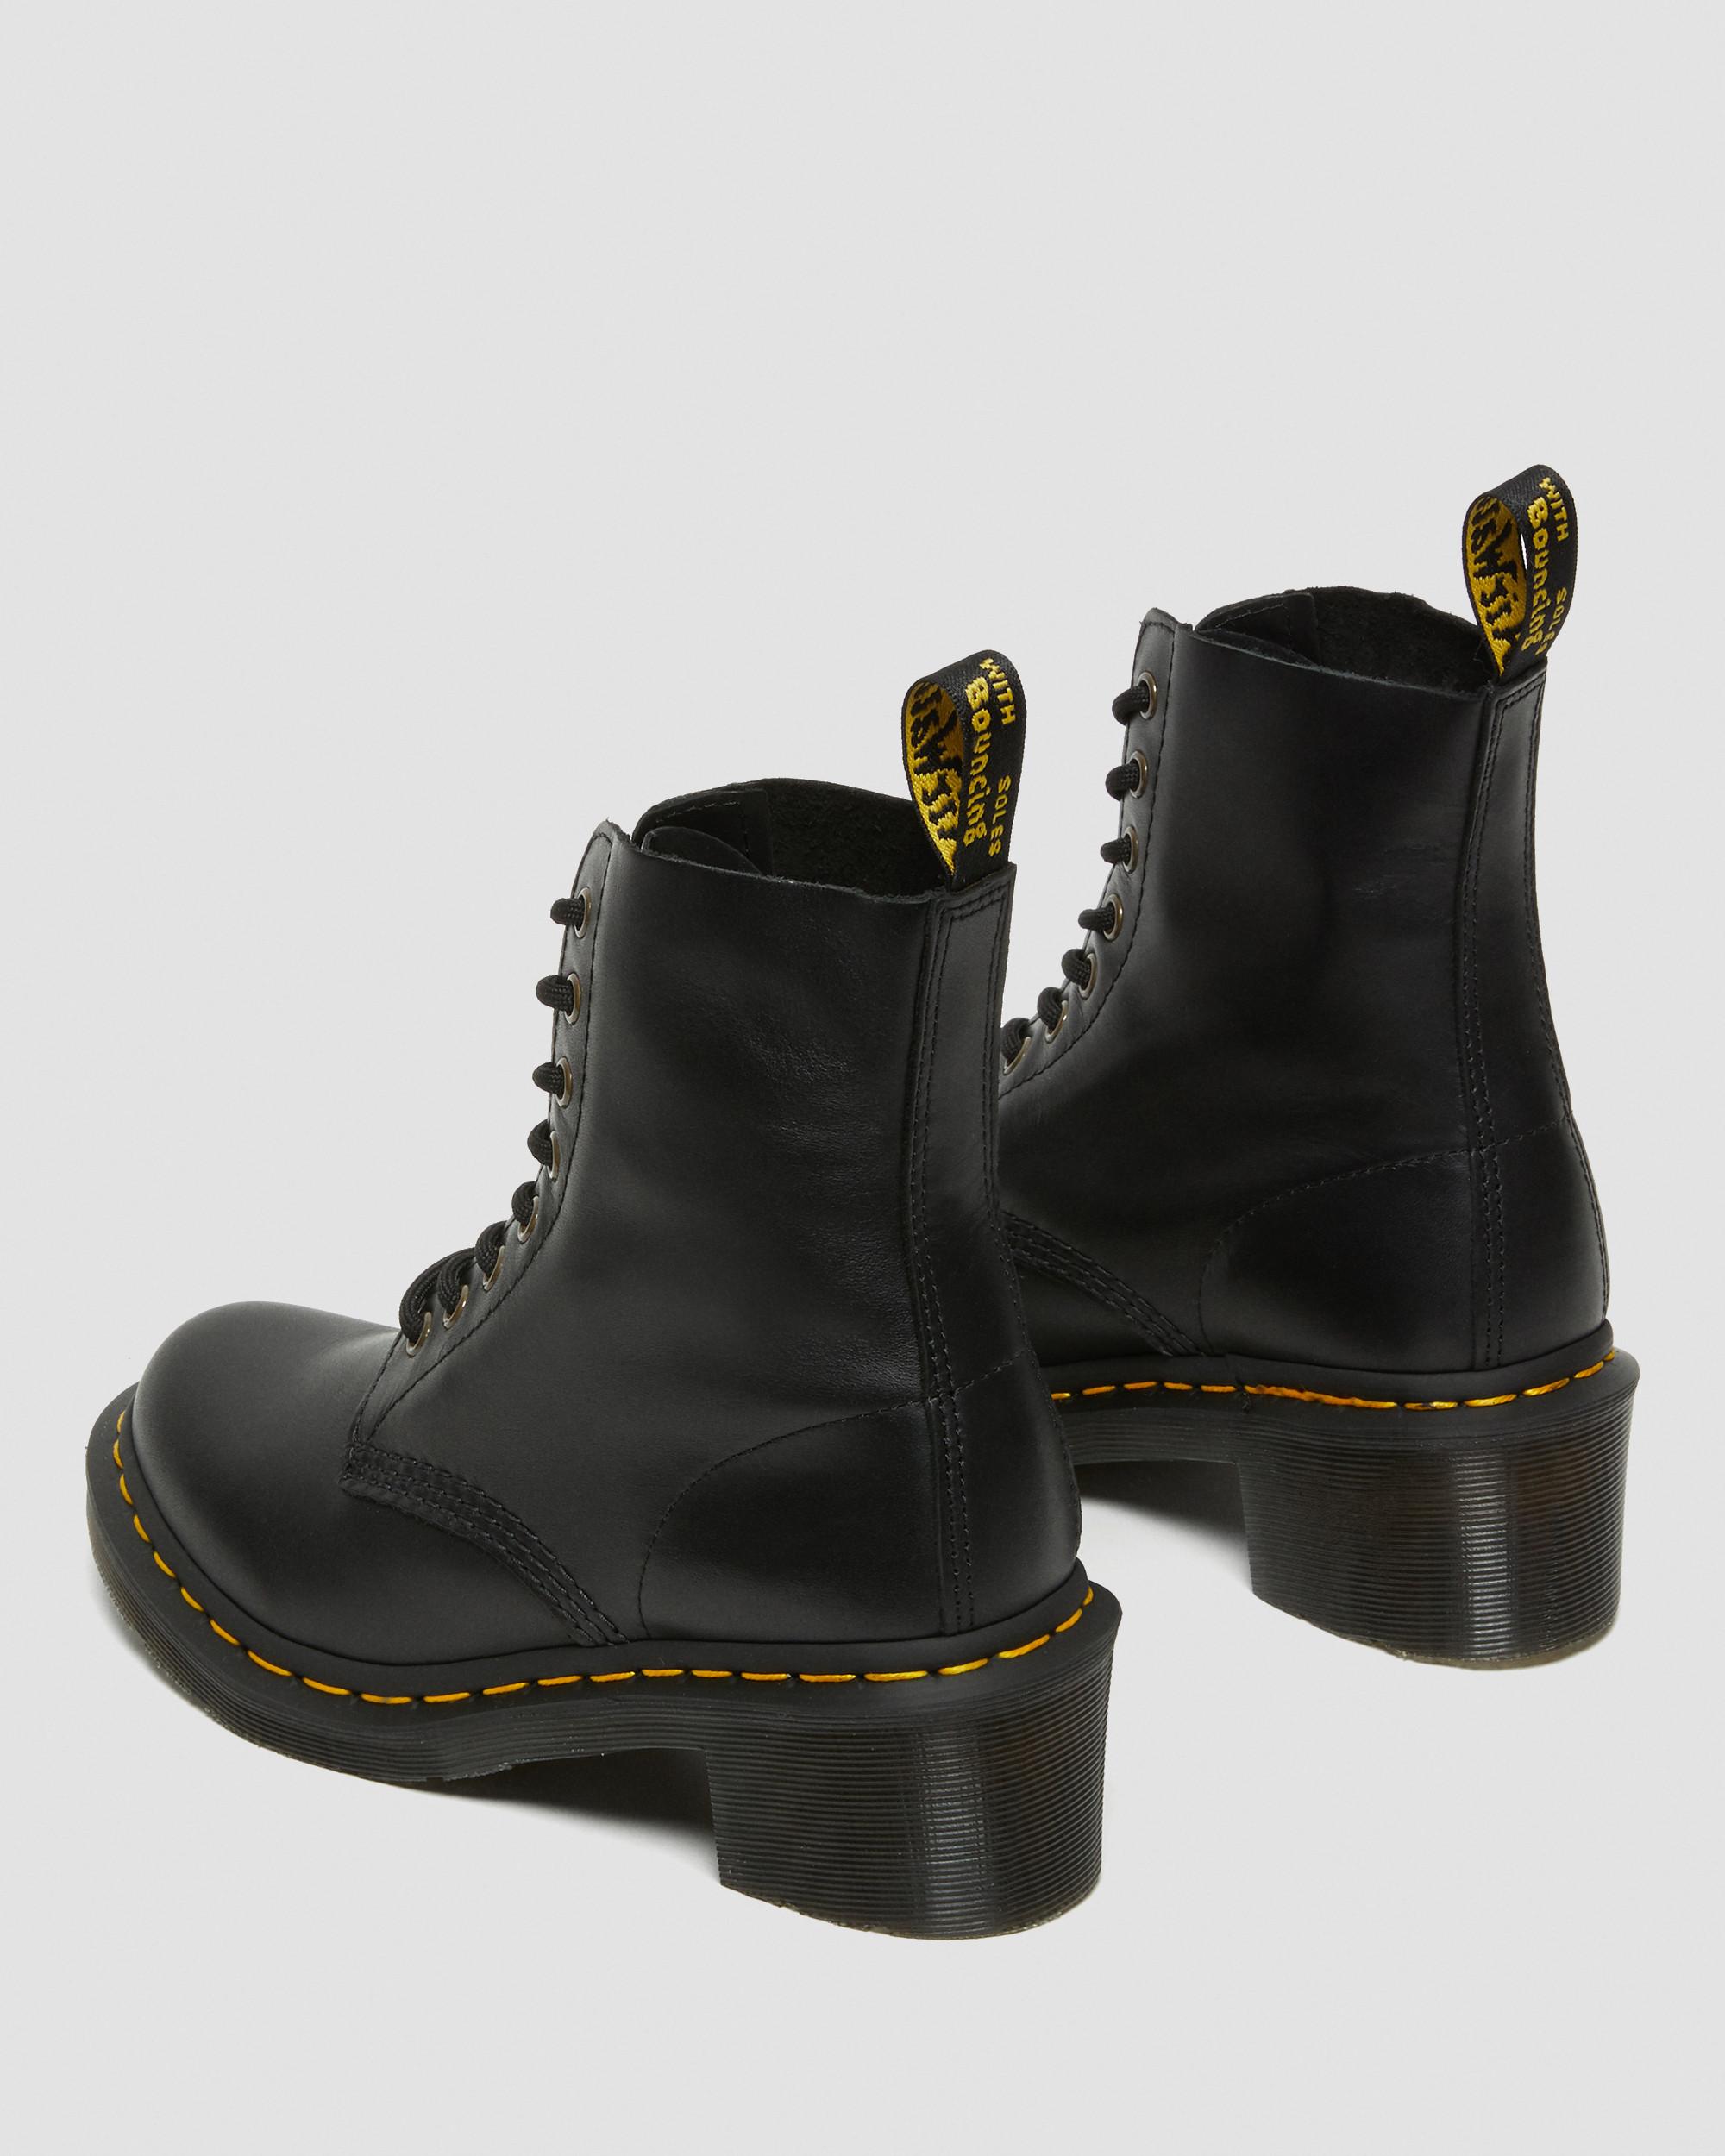 CLEMENCY WOMEN'S LEATHER HEELED LACE UP BOOTS | Dr. Martens Official